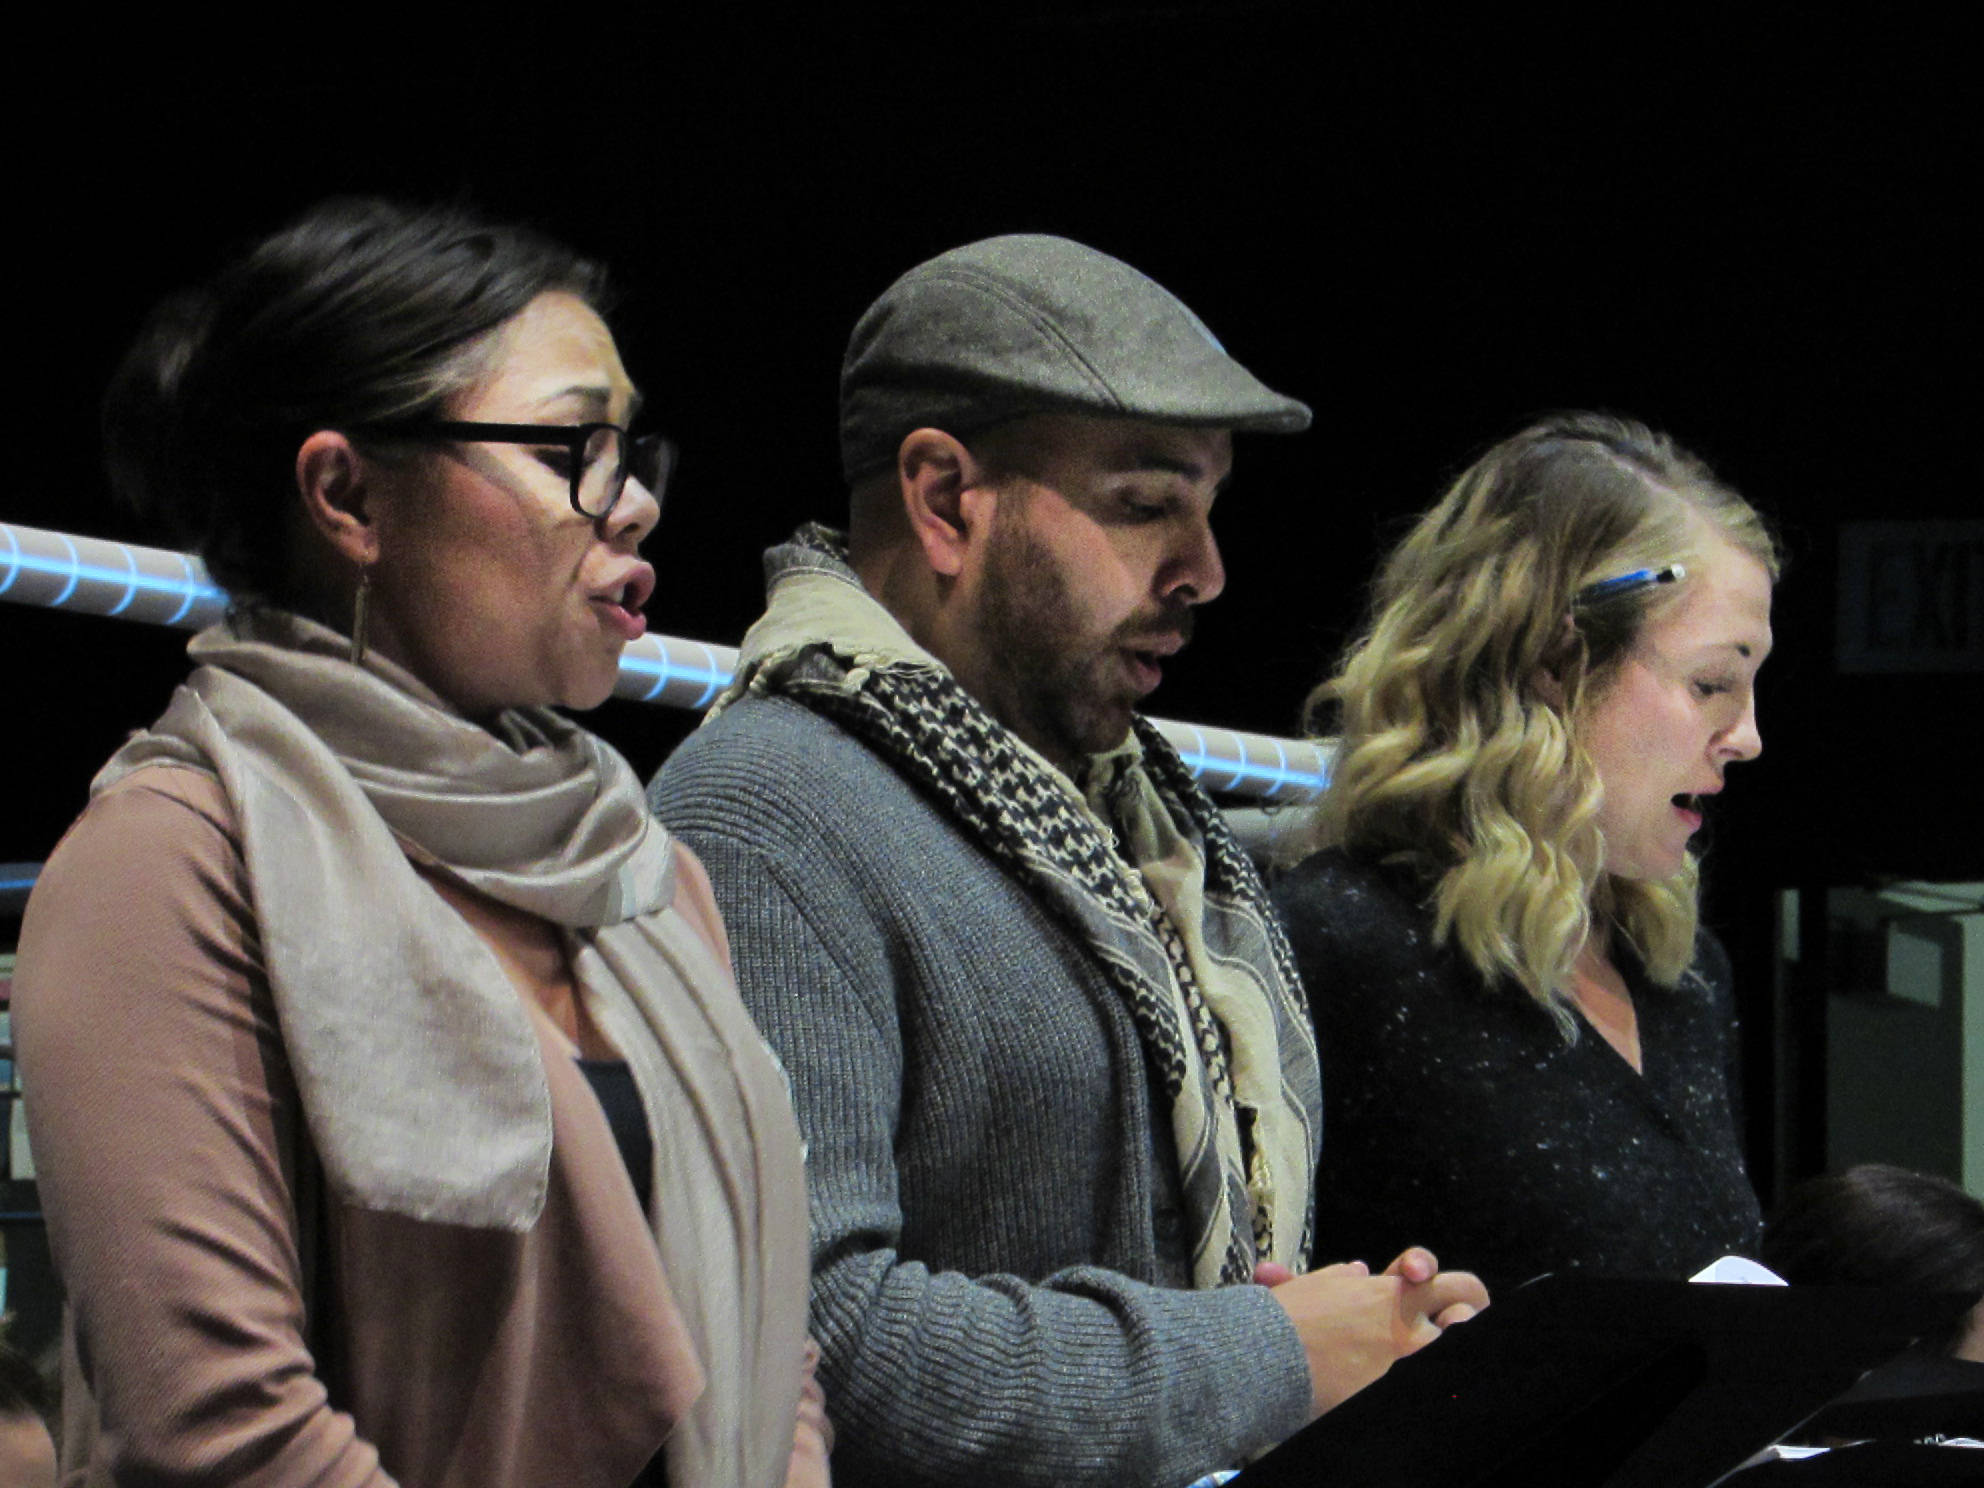 Tess Altiveros, José Rubio and Gin Anderson sing during rehearsal for “The Princess Sophia” opera. The two-act opera opens Thursday. (Ben Hohenstatt | Capital City Weekly)